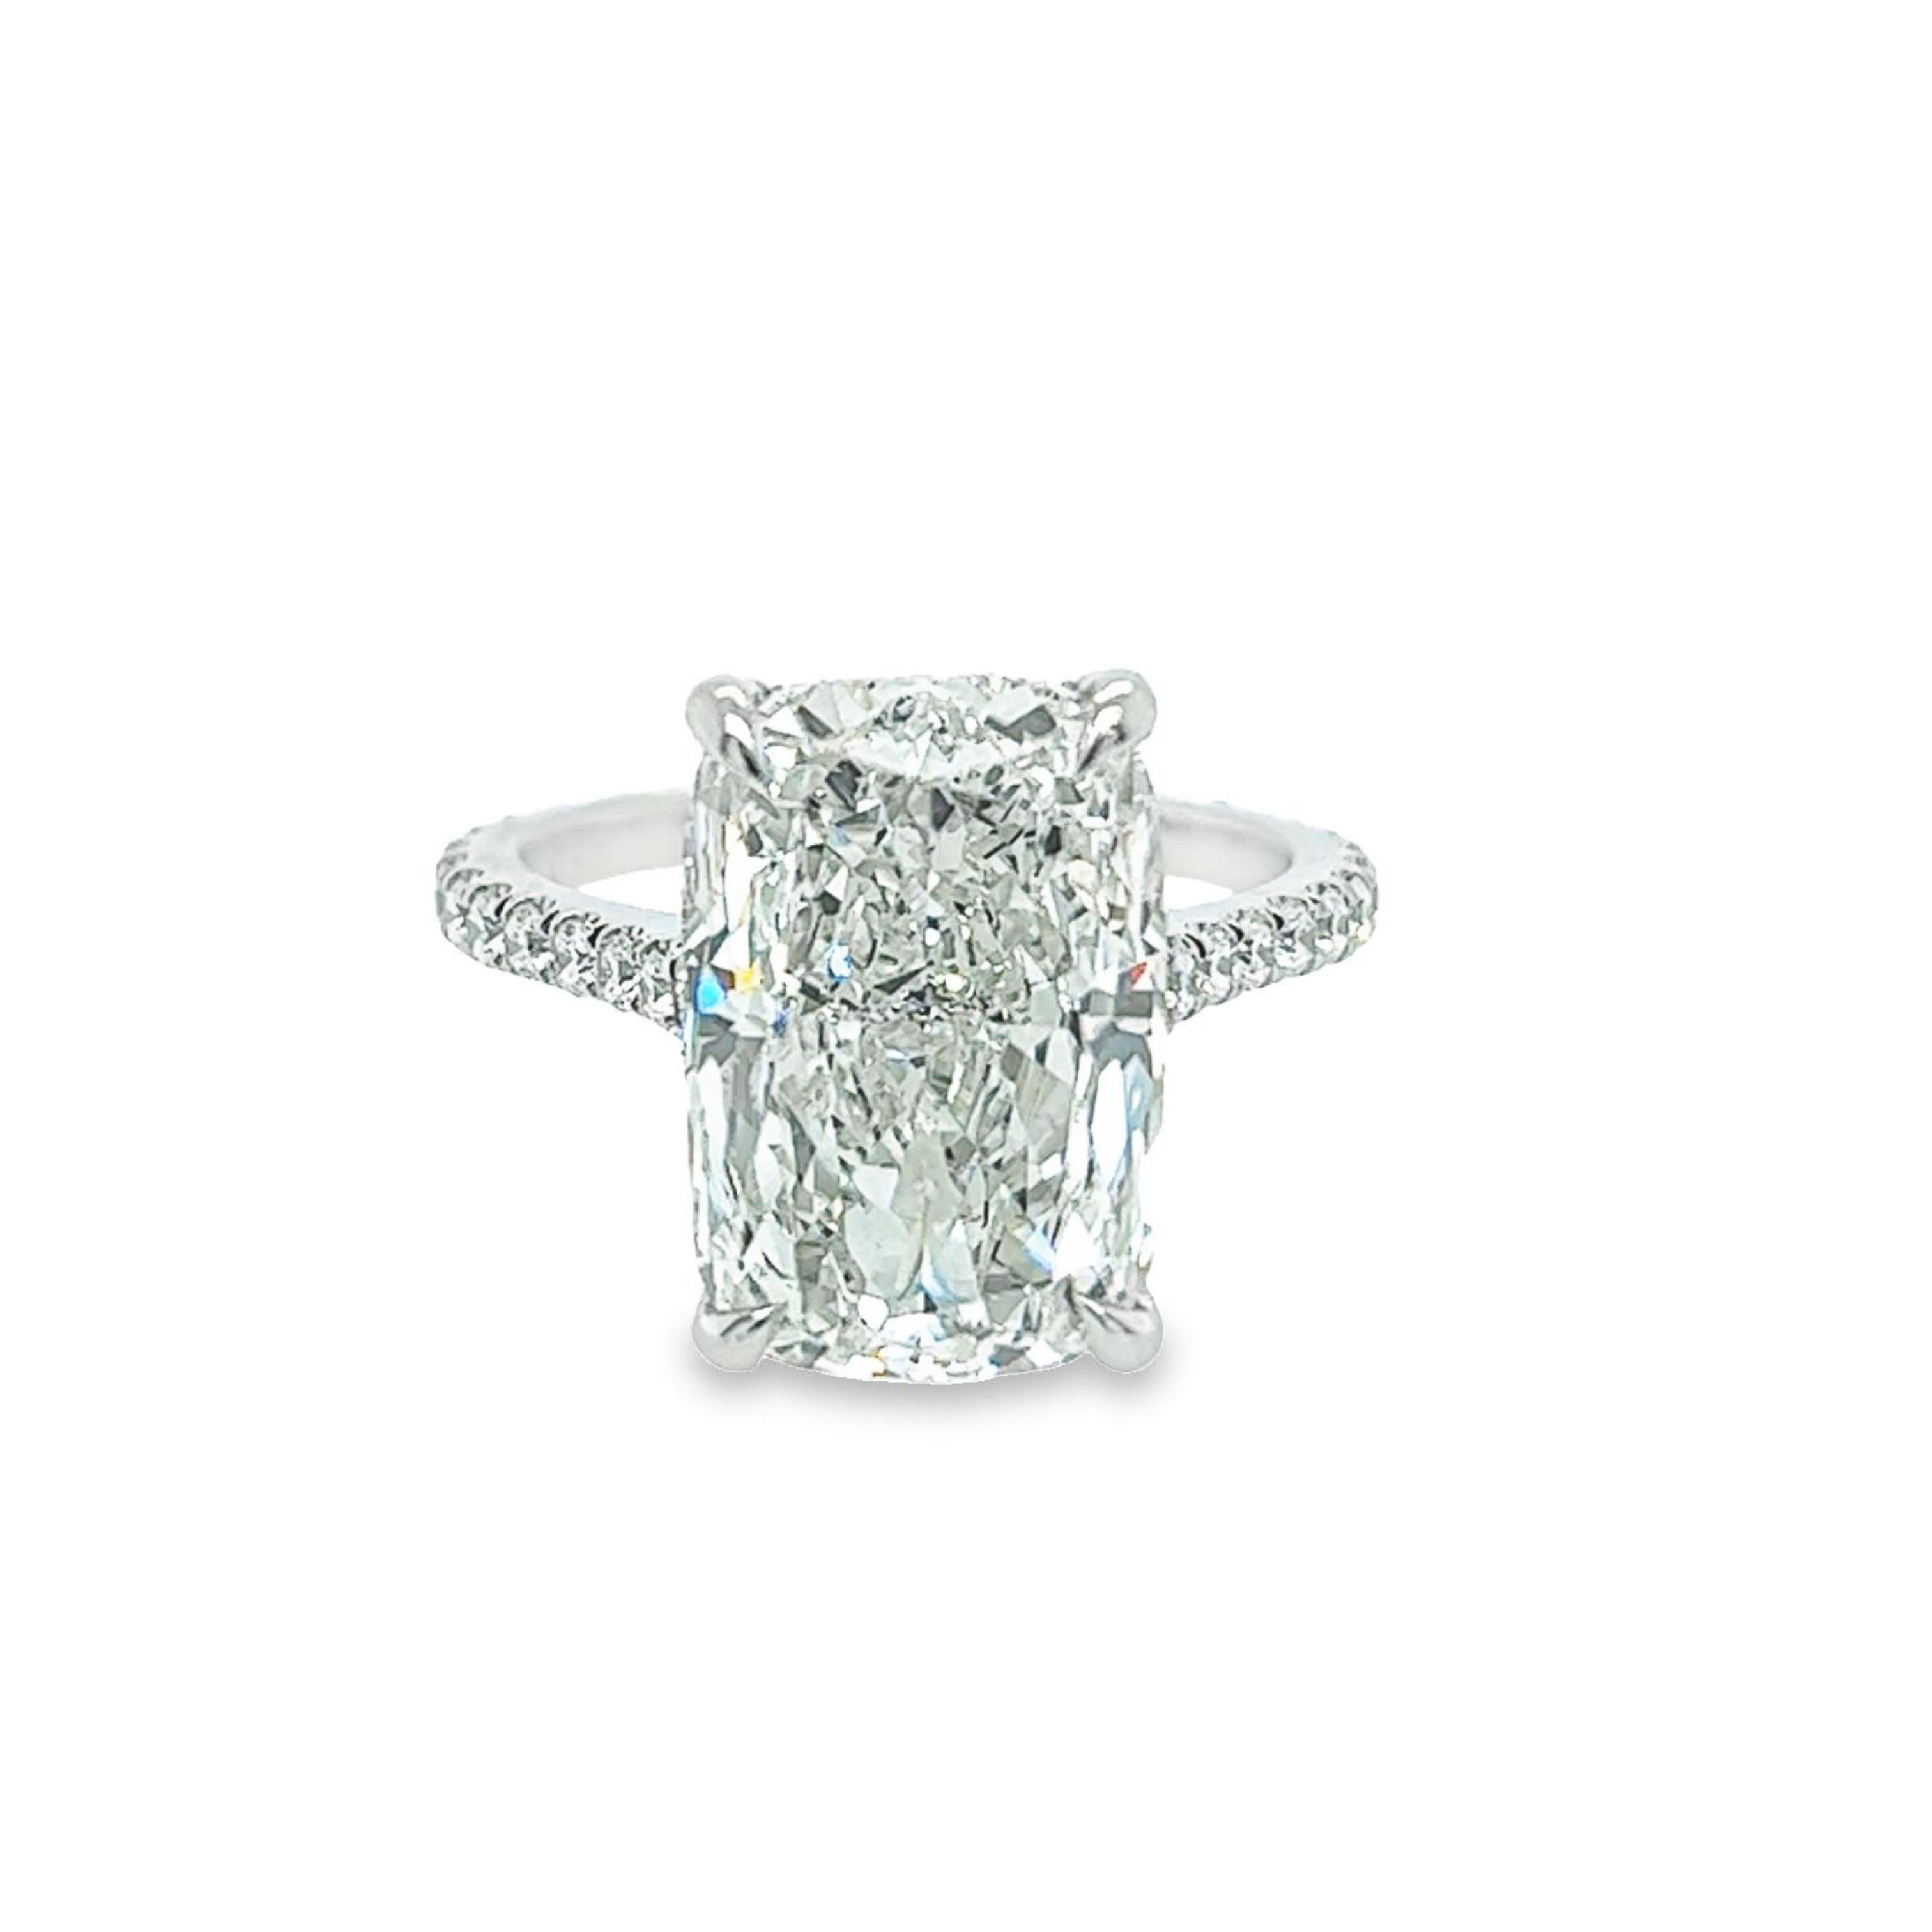 Rosenberg Diamonds & Co. 8.07 carat Cushion cut H color SI1 clarity is accompanied by a GIA certificate. This breathtaking elongated Cushion is full of brilliance and an exceptional SI1 that is set in a handmade platinum setting. This ring continues